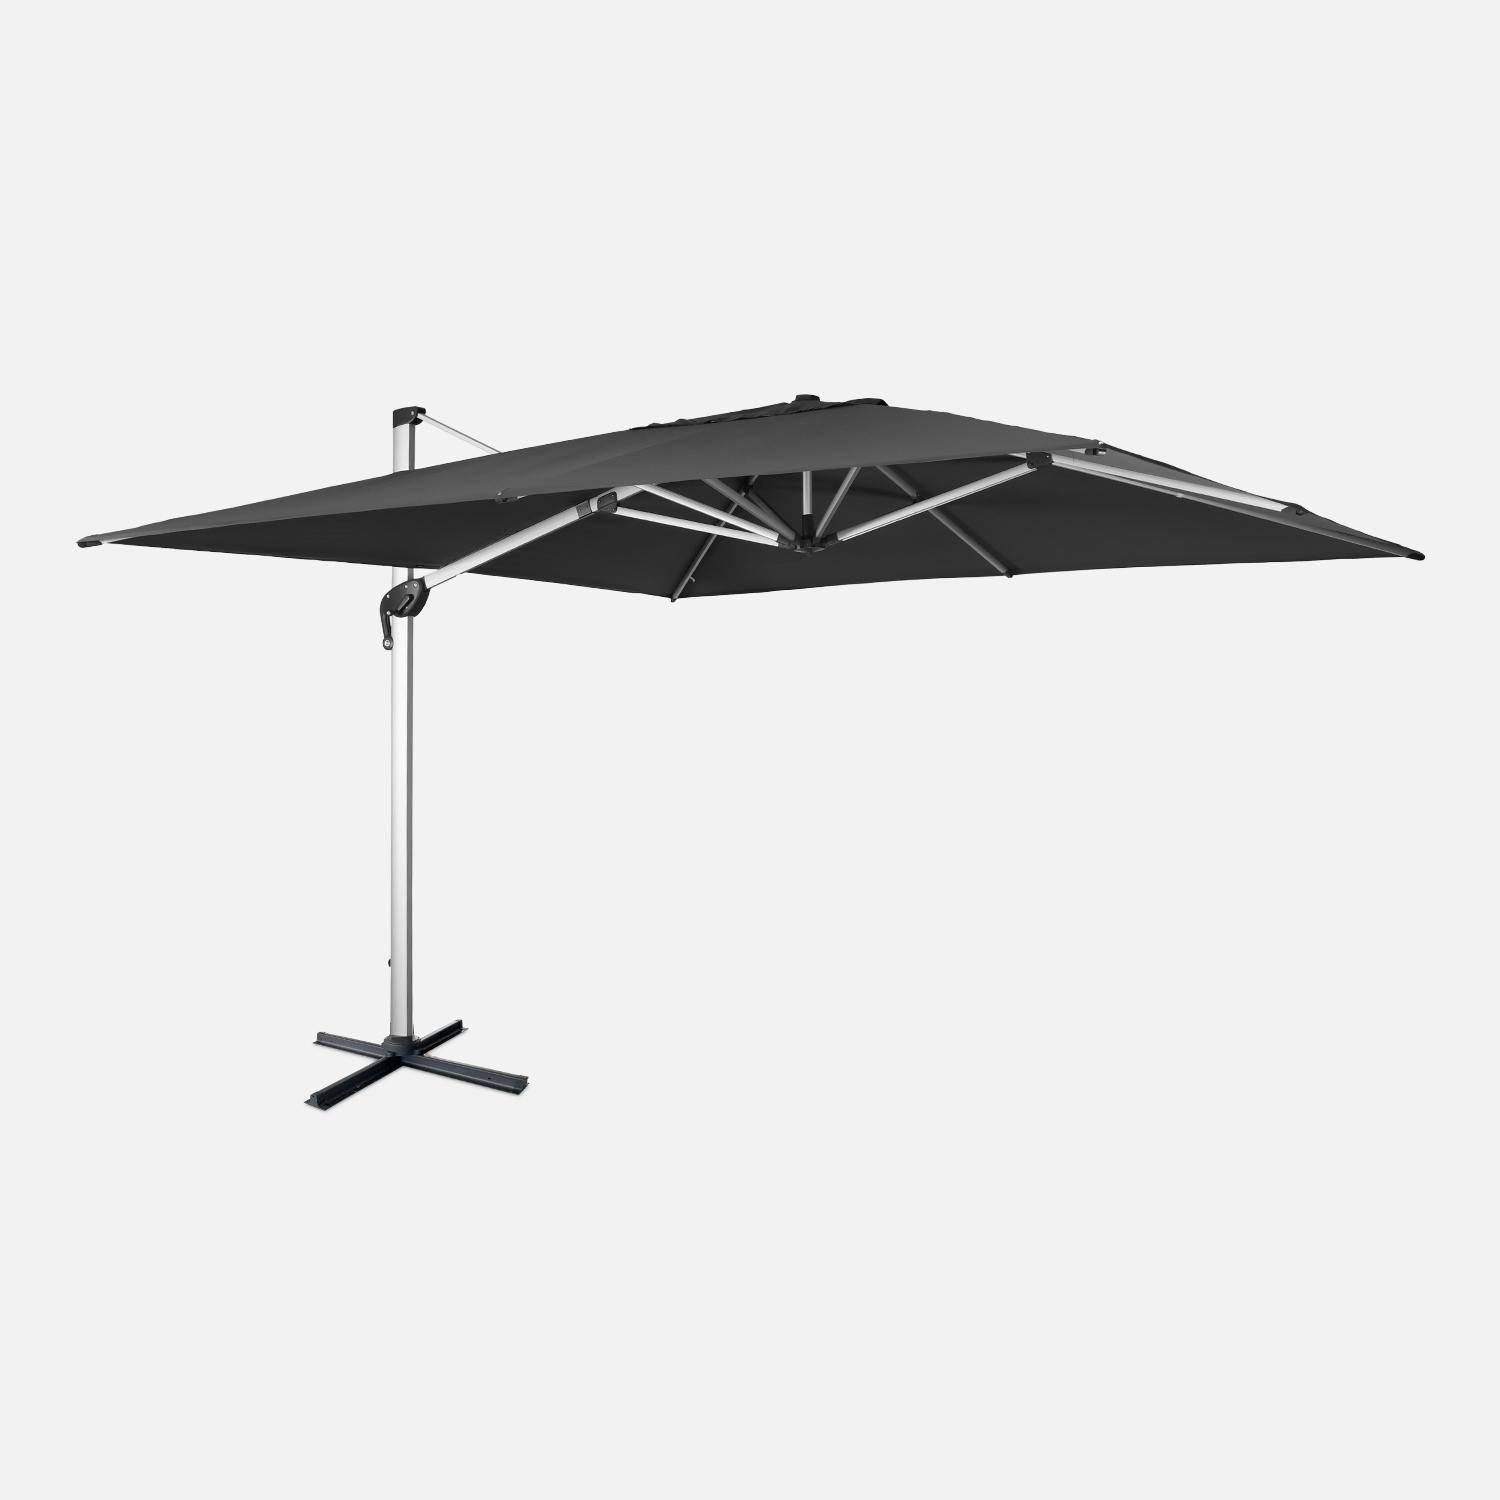 Premium quality, 4x4m square parasol - PYLA Anthracite grey - European Agora canopy, anodised aluminium stand, rotating, protective dust cover,sweeek,Photo1